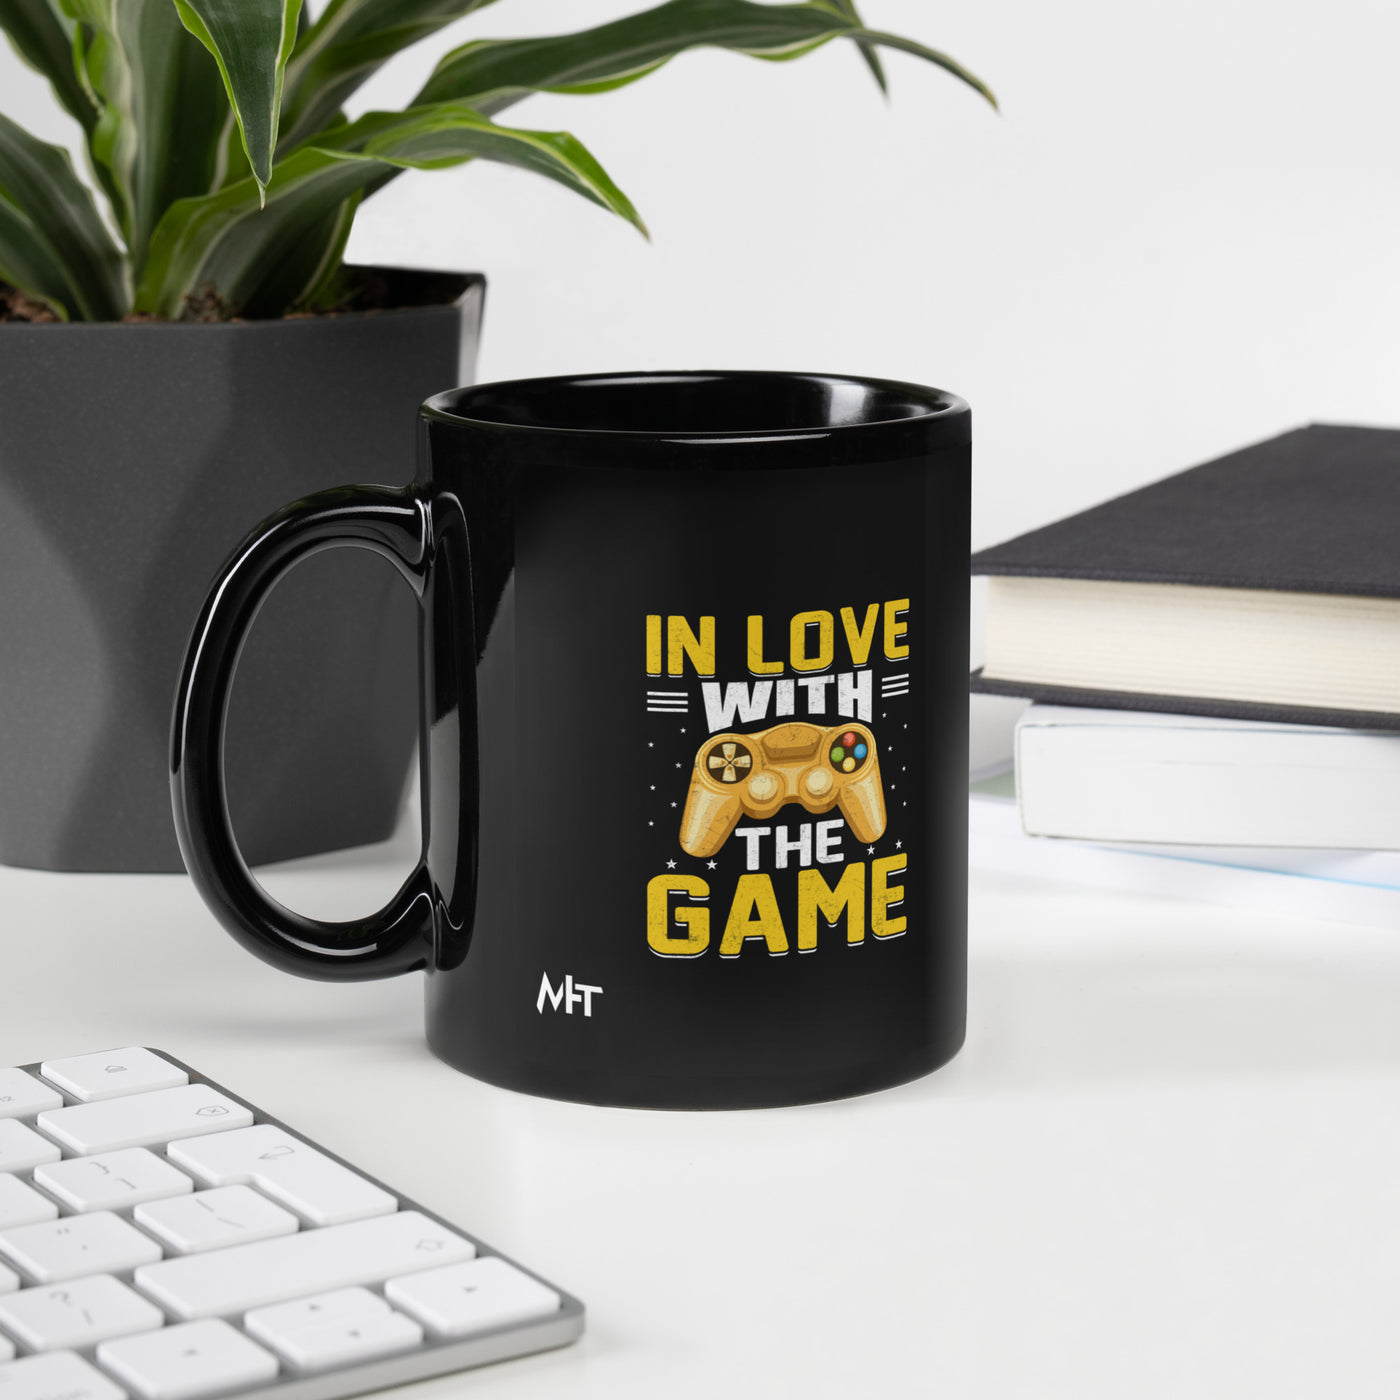 In Love With The Game - Black Glossy Mug